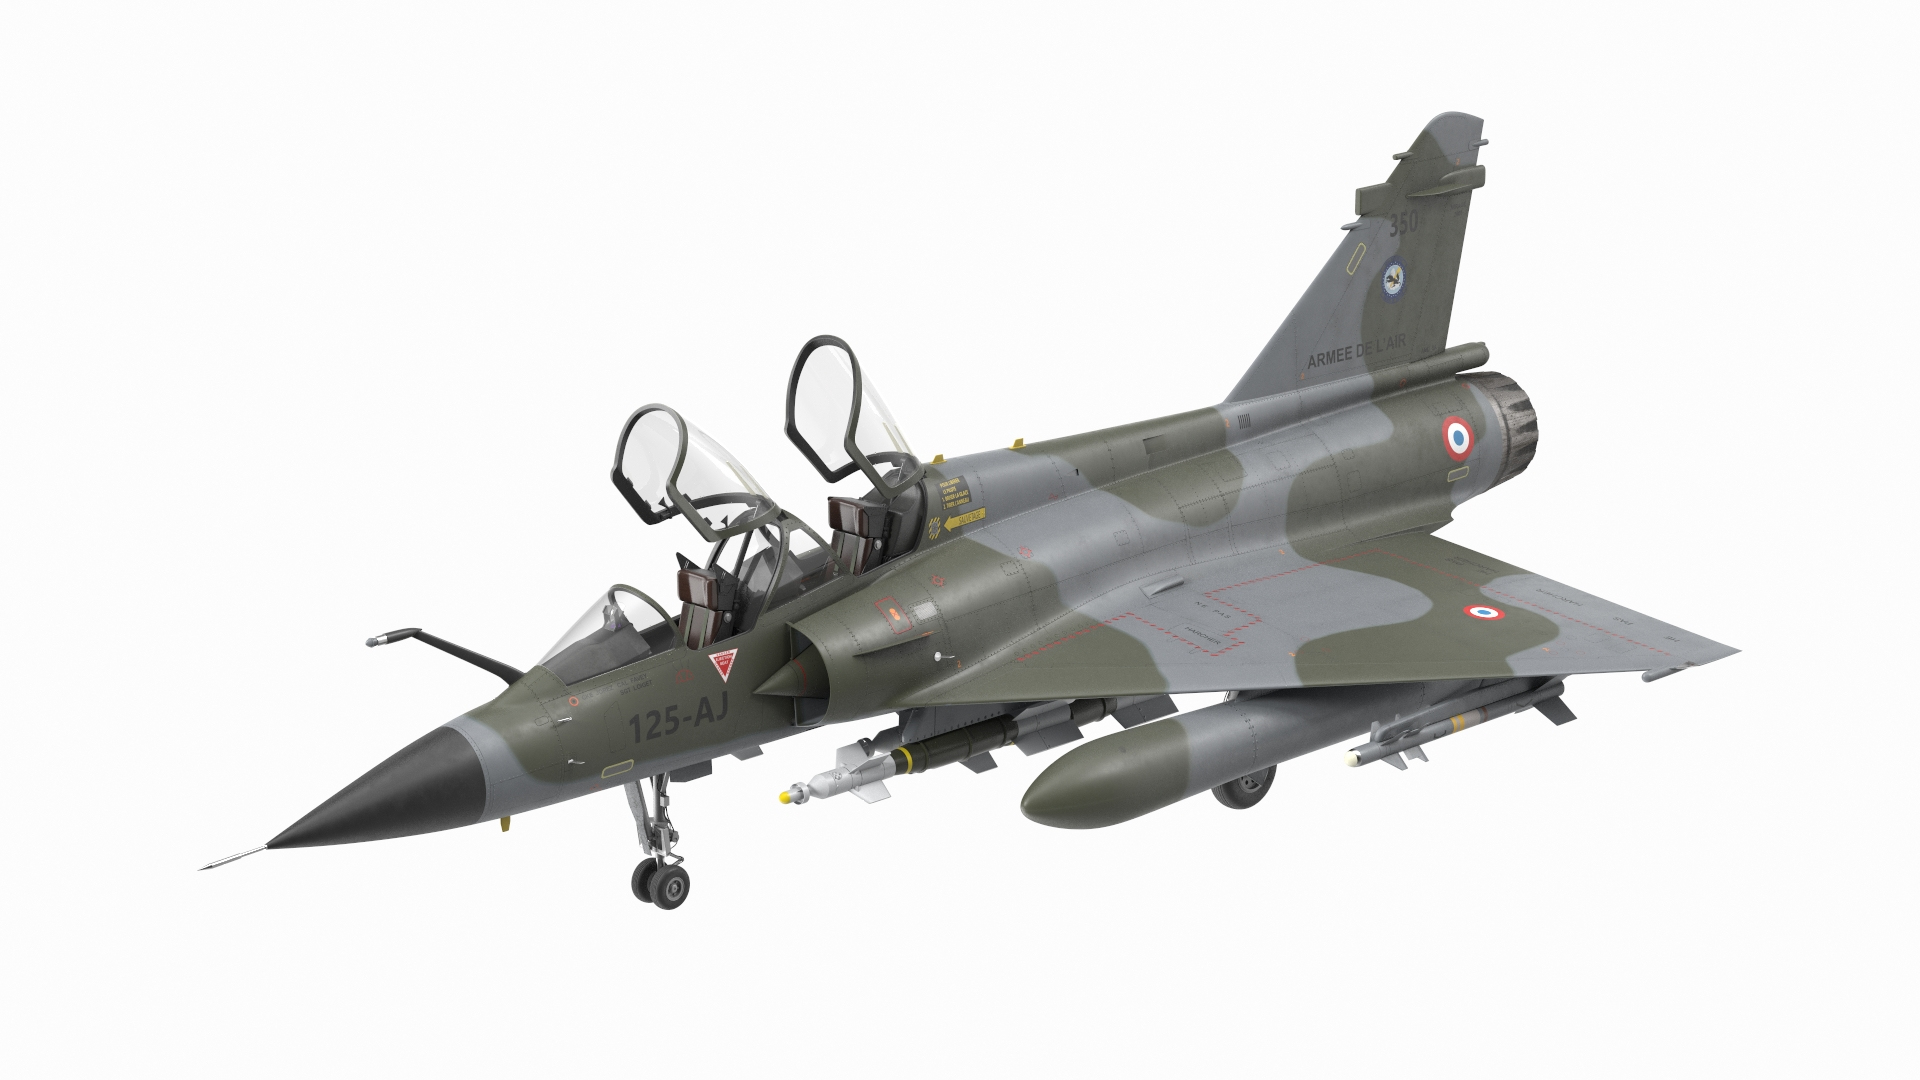 Dassault Mirage 2000N Tactical Bomber Camouflage with Armament Rigged model https://p.turbosquid.com/ts-thumb/np/jUCvfy/id/dassault_mirage_2000n_tactical_bomber_camouflage_with_armament_rigged_360/jpg/1638175174/1920x1080/turn_fit_q99/c2617cdbb337528717a07706f0114e7c4dee29e5/dassault_mirage_2000n_tactical_bomber_camouflage_with_armament_rigged_360-1.jpg